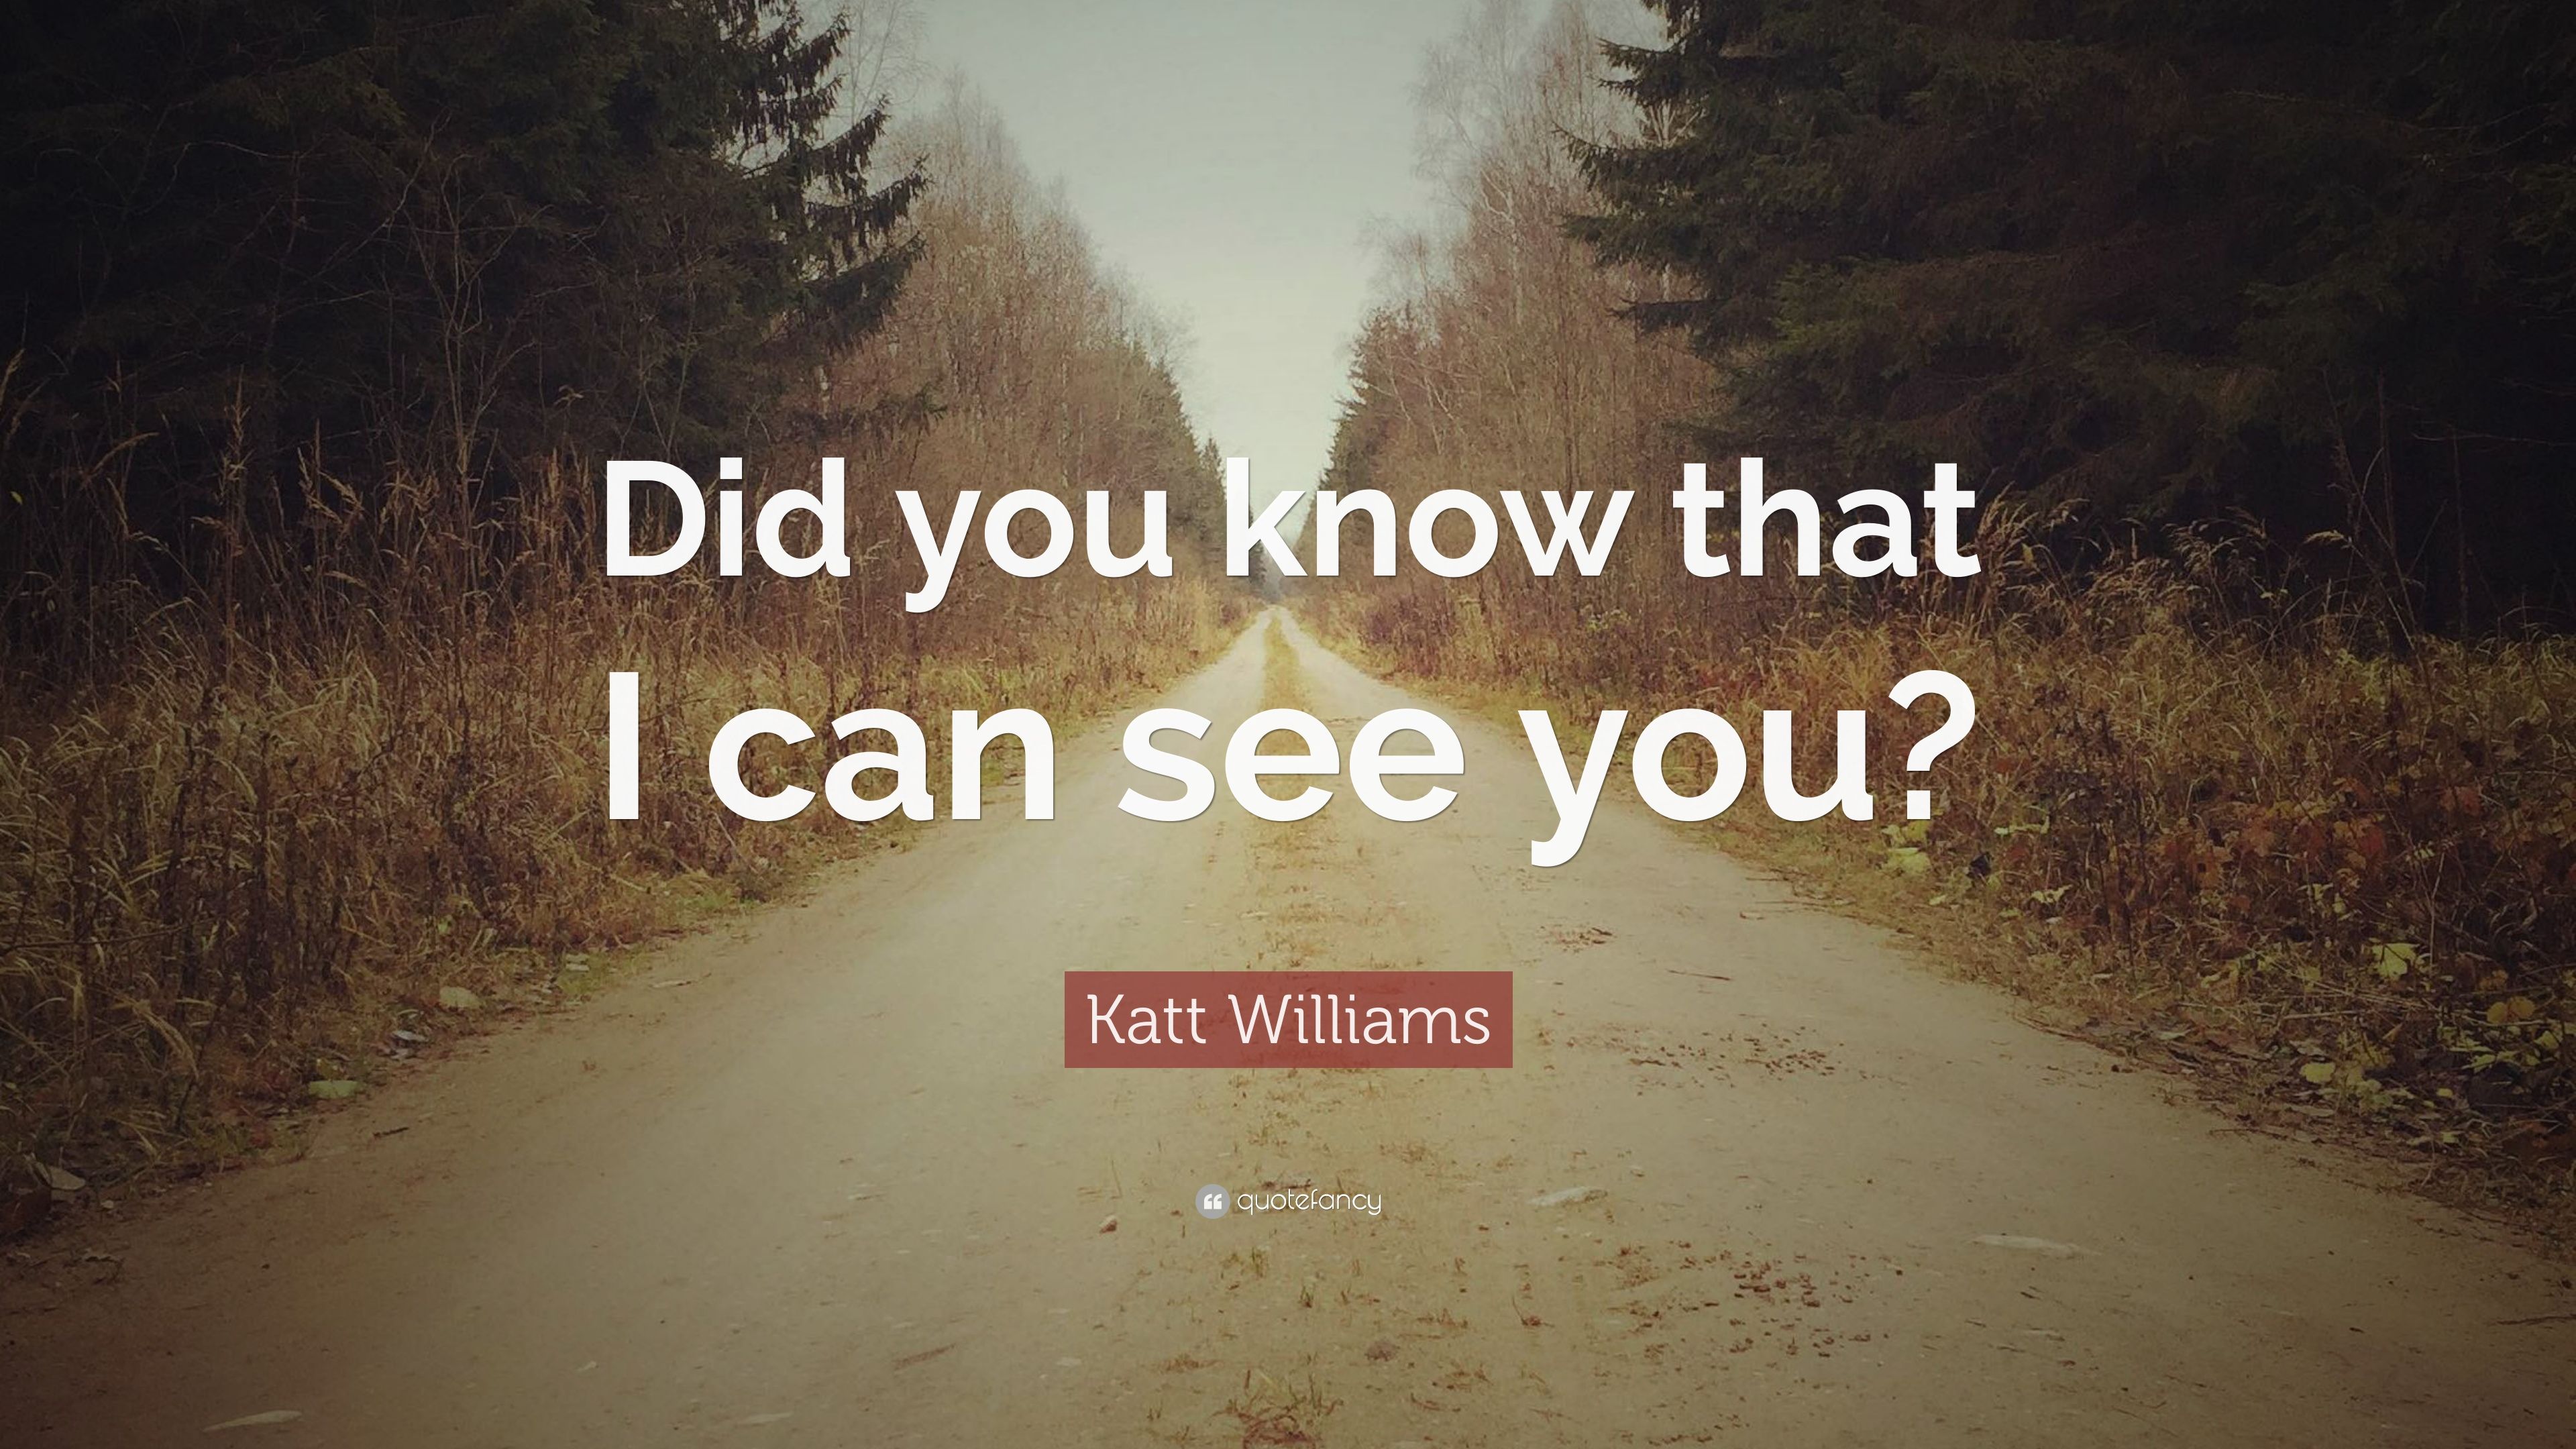 Katt Williams Quote: “Did you know that I can see you?” 9